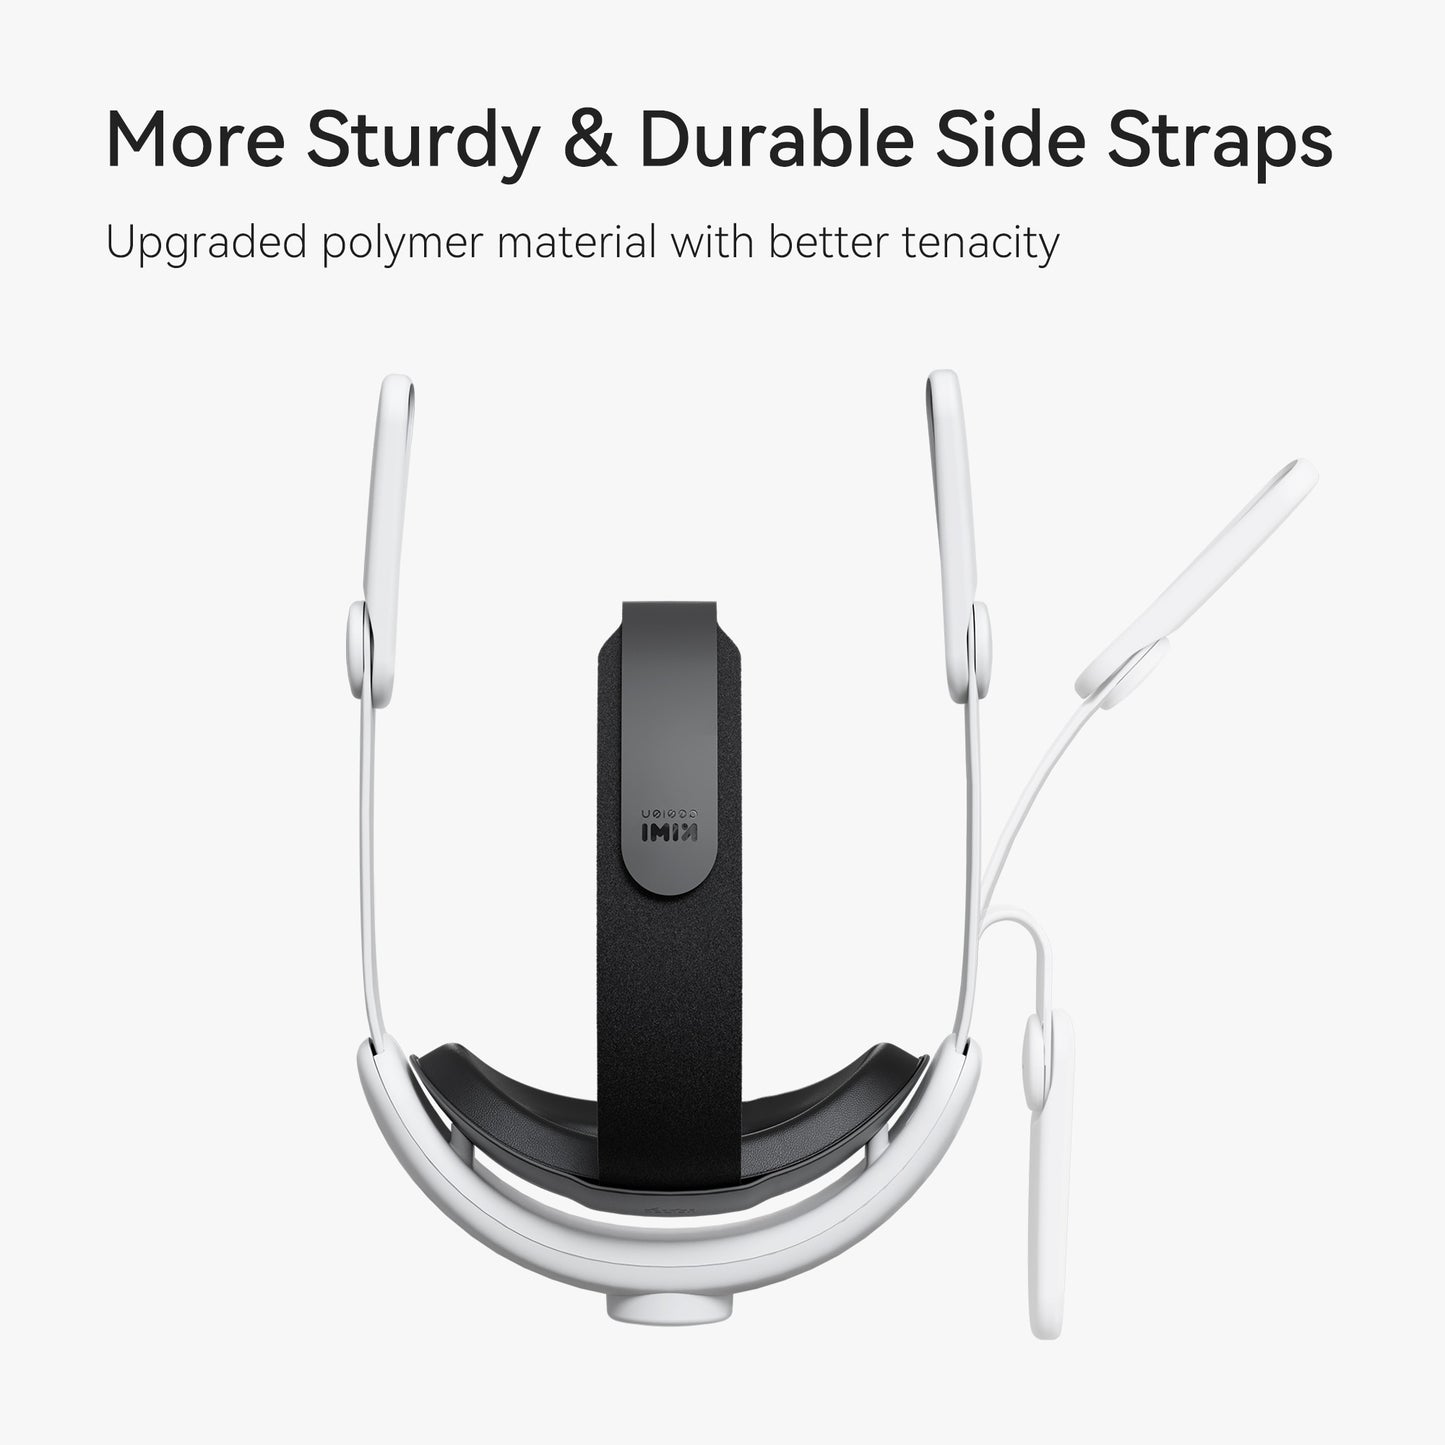 KIWI design For Oculus Quest 2 Comfort Adjustable Head Strap Increase Supporting Improve Comfort-Virtual For VR Accessories